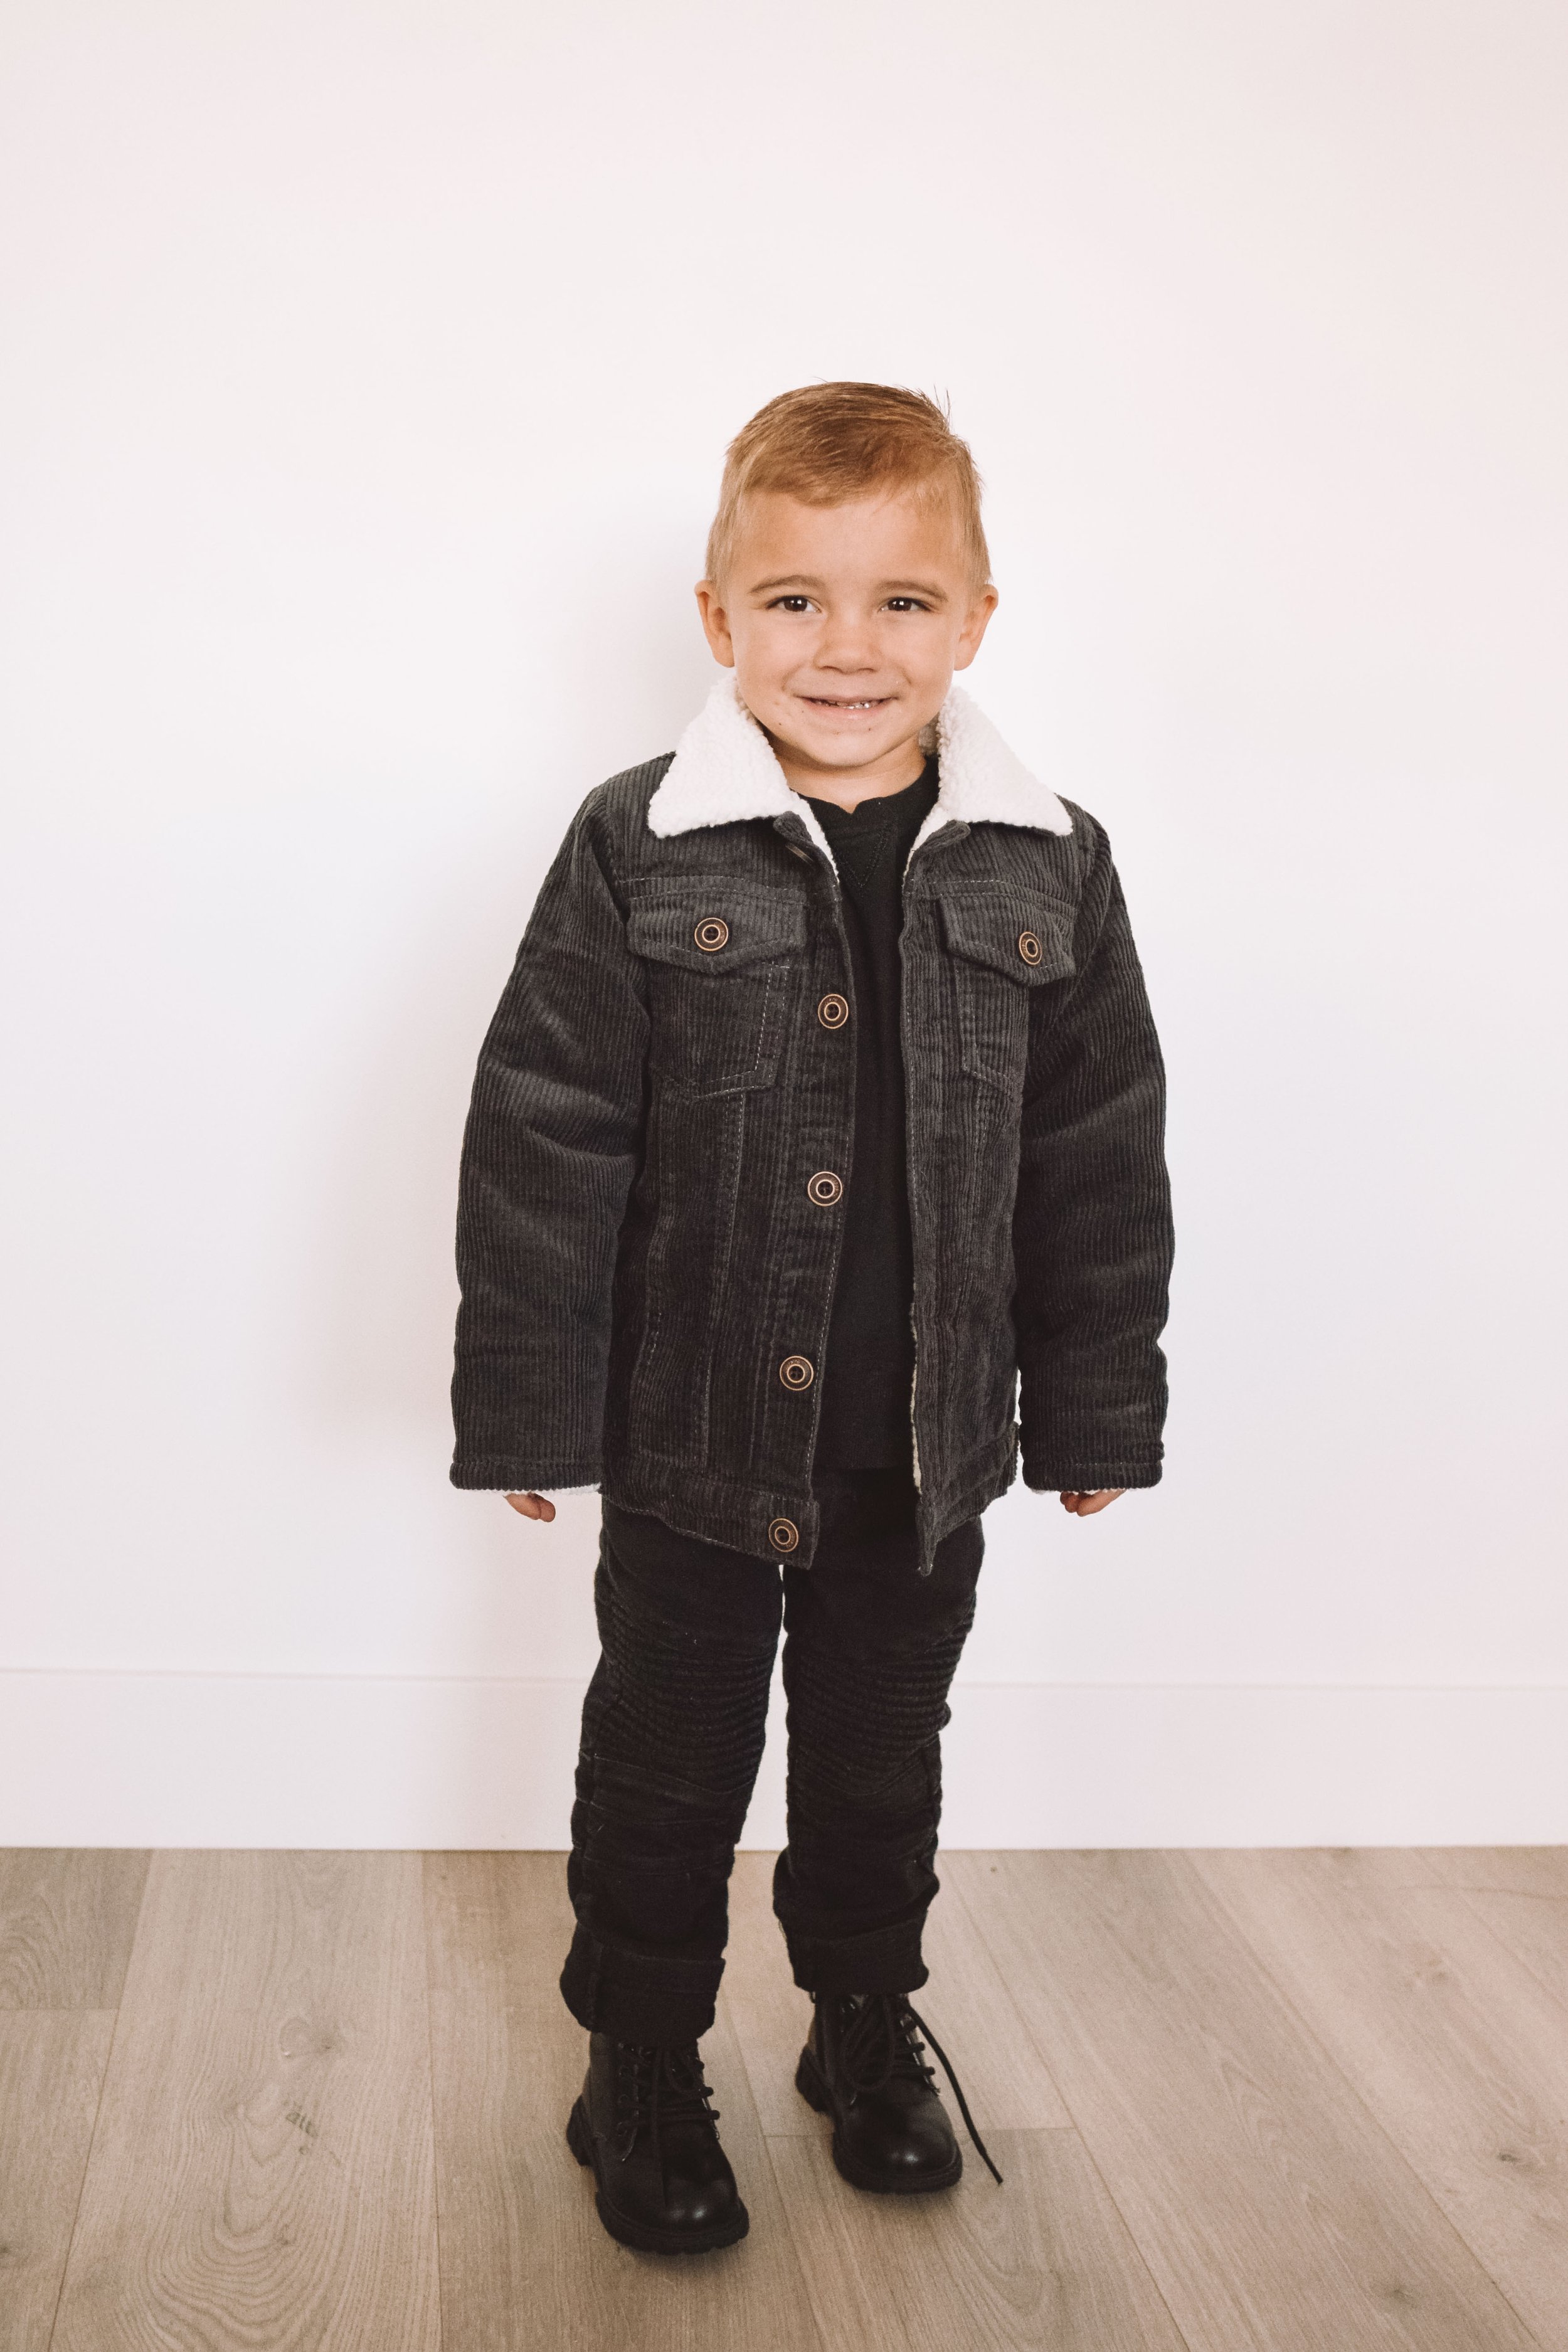 Kids Corduroy Jacket from Amazon - Mommy and Me Winter Outfits